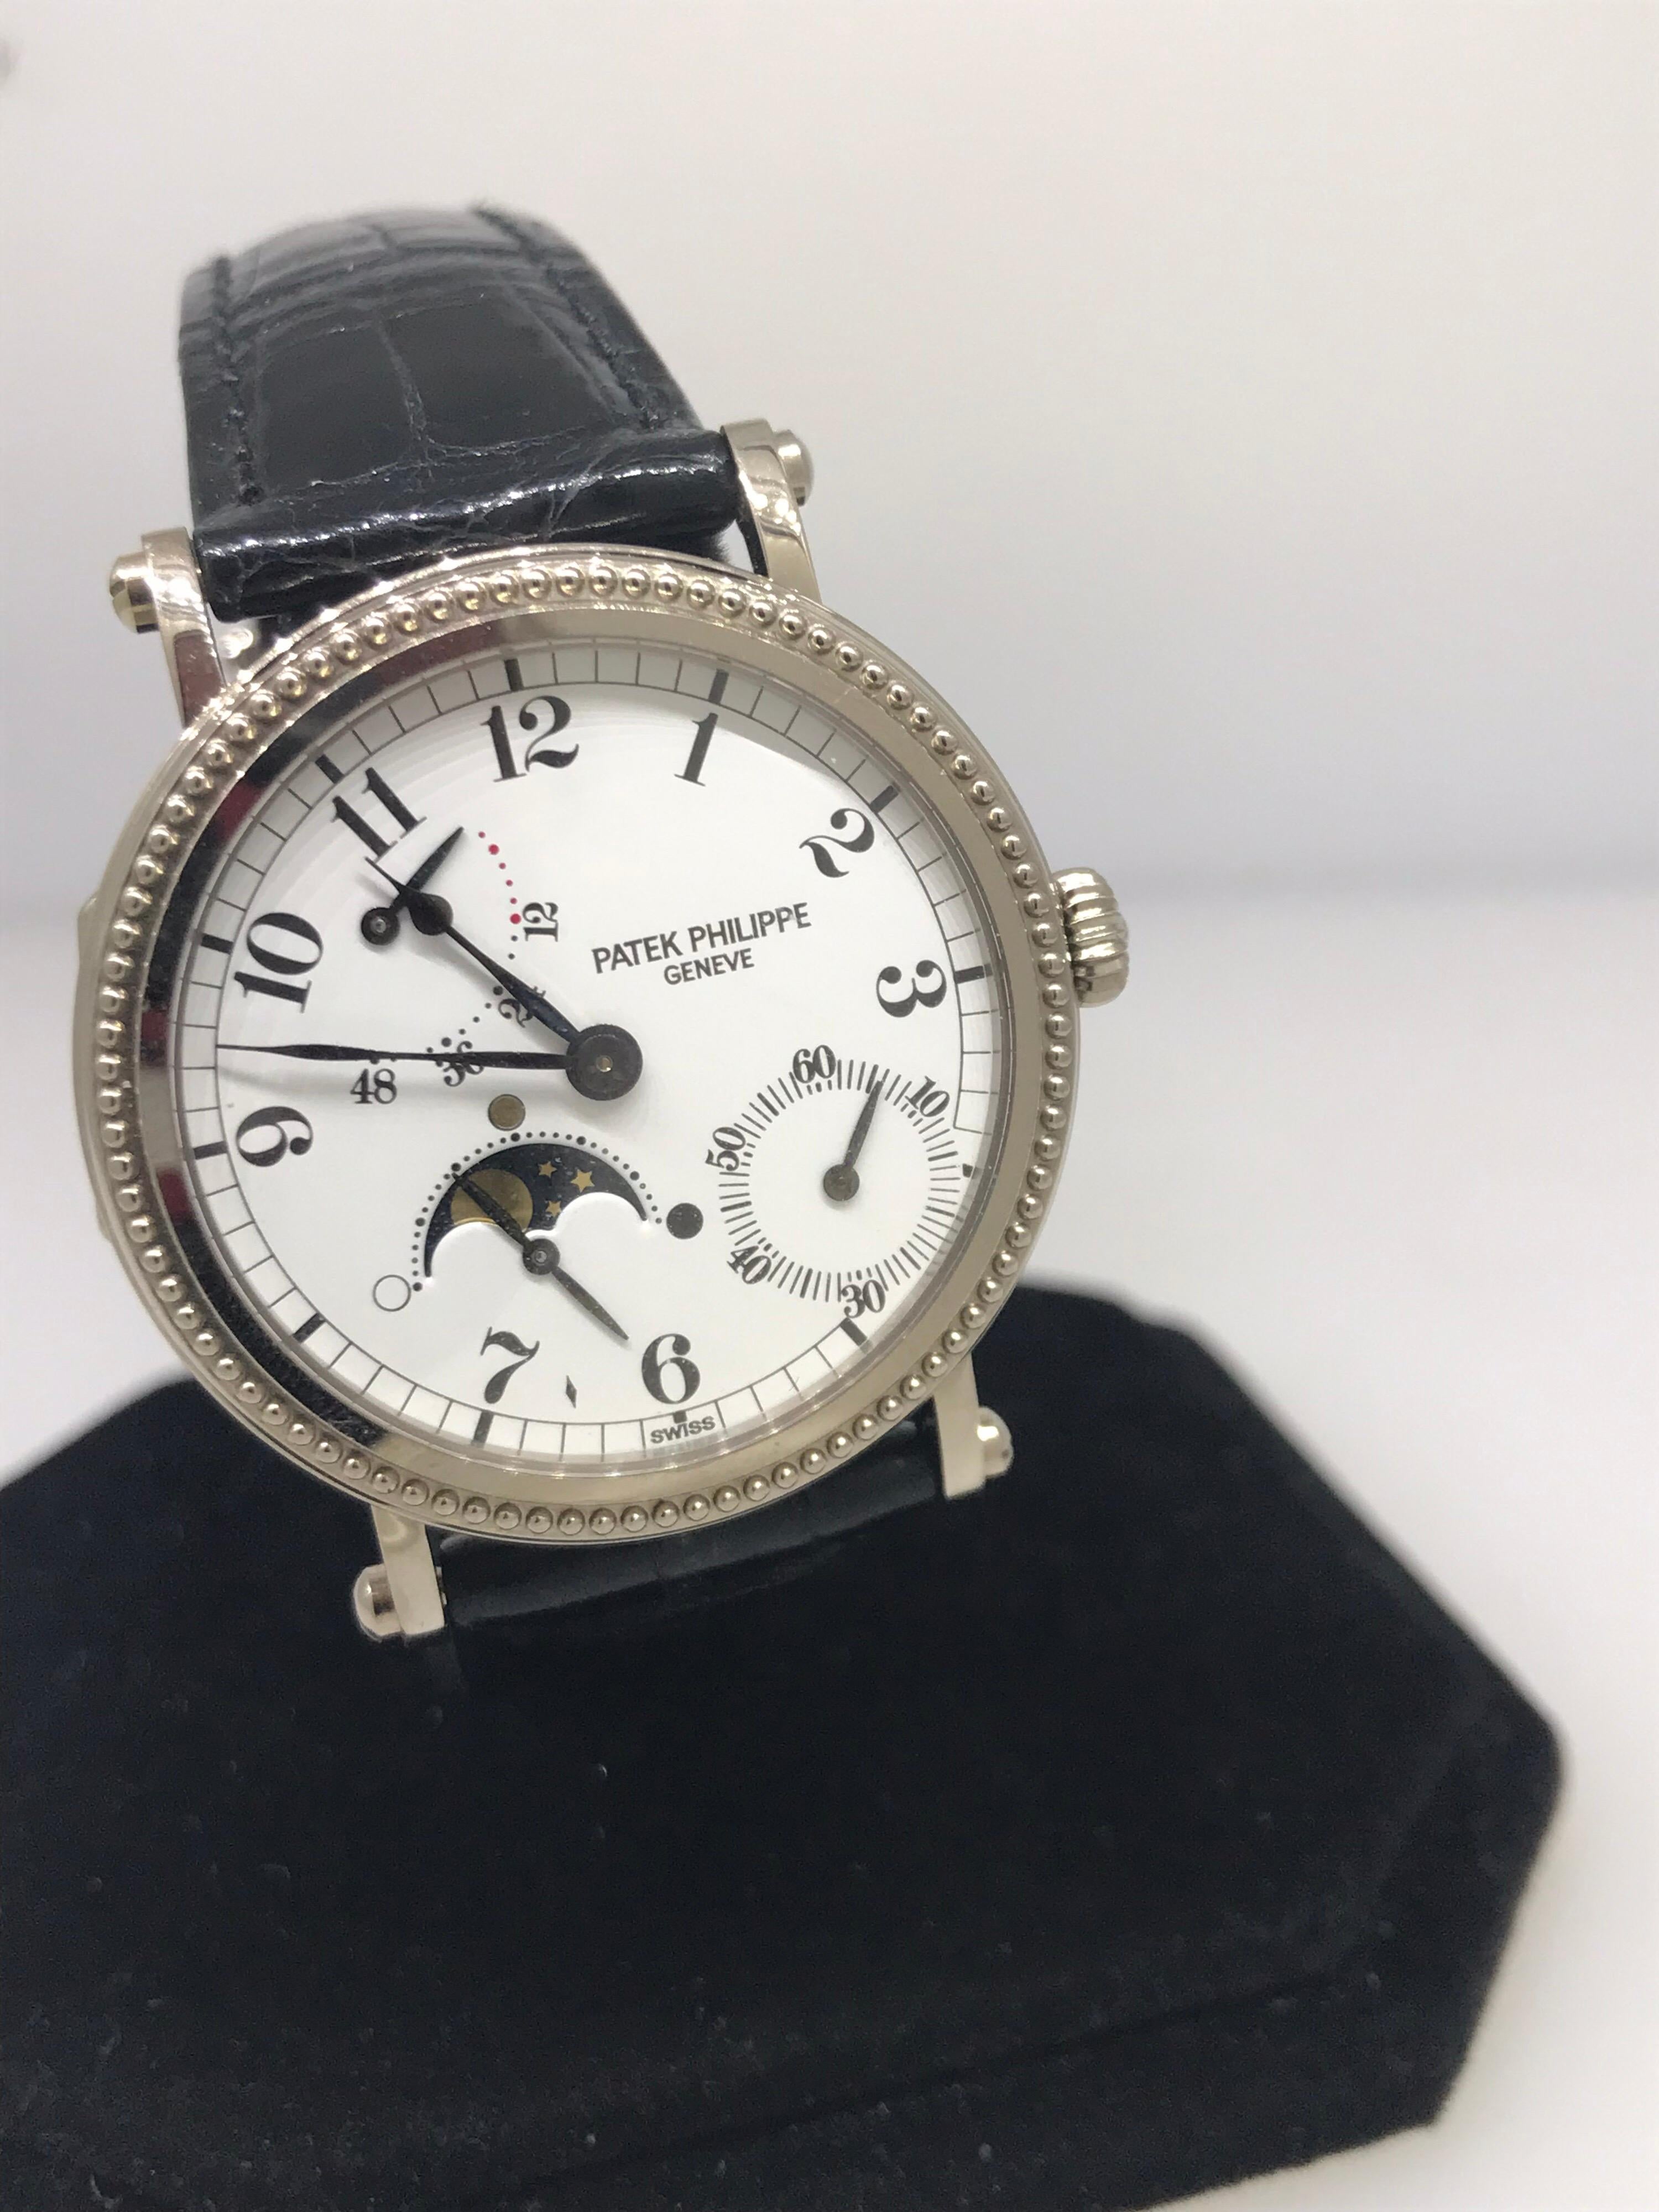 Patek Philippe Men's Watch

Model Number: 5015P

100% Authentic

Pre Owned in excellent condition

Comes with a generic watch box

Platinum Case

White Dial

Case Diameter: 35mm

Black Leather Band

Tang Buckle

Swiss made automatic